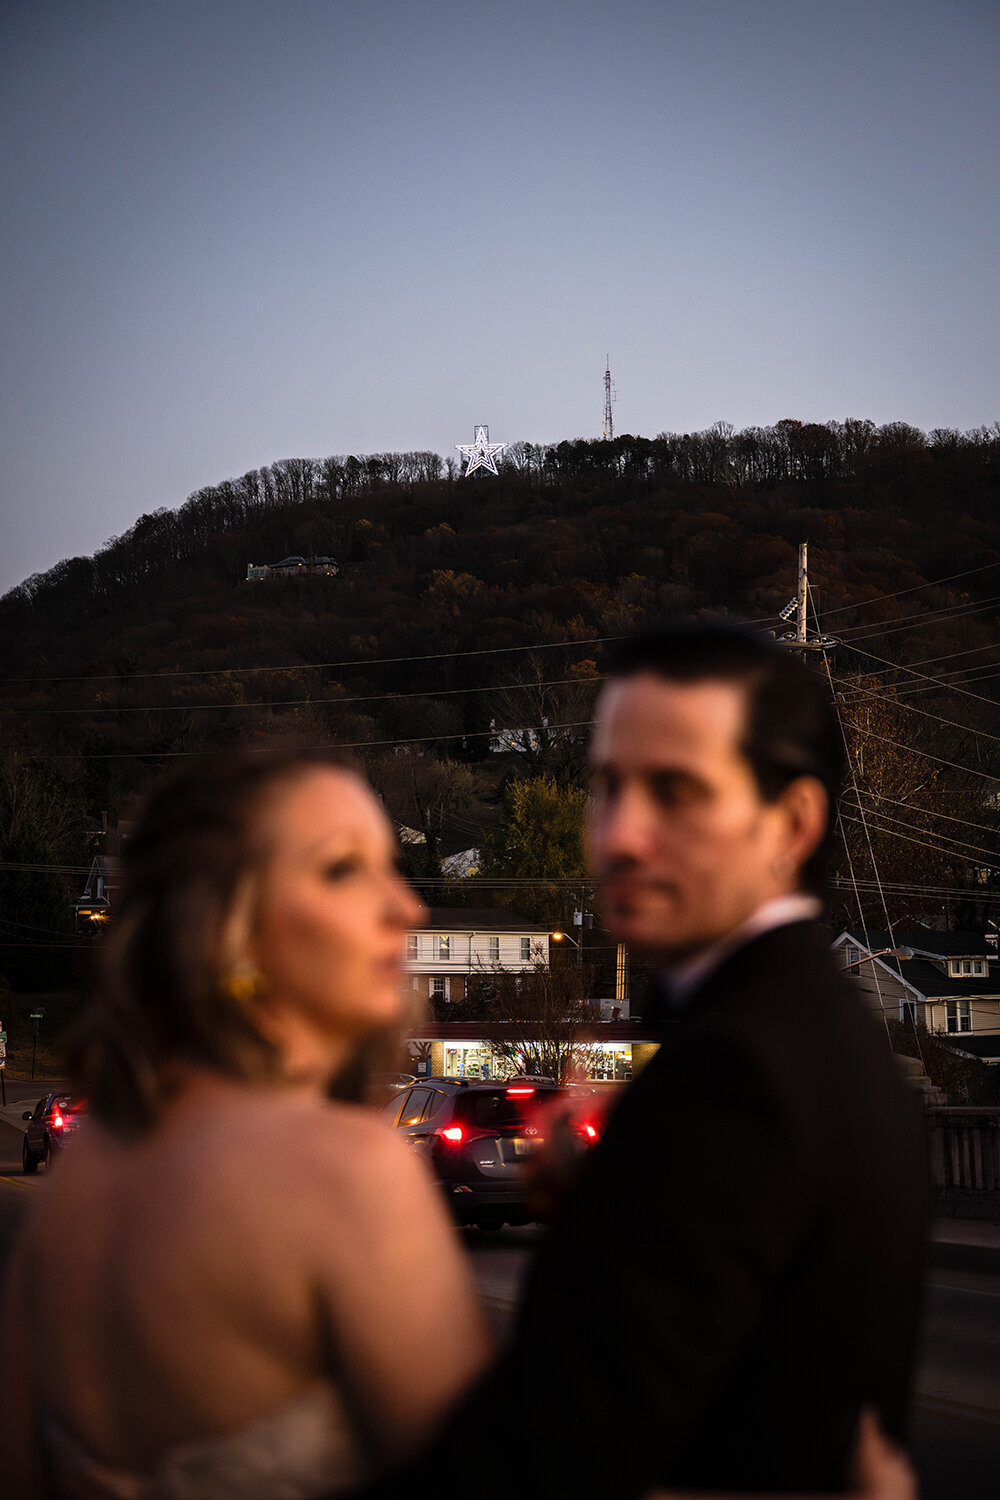 A bride and groom wrap their arms around one another and look in opposite directions with the Mill Mountain Star in the background. The couple in the foreground are purposefully blurred out to focus on the now illuminated Roanoke Star atop Mill Mountain at sunset.